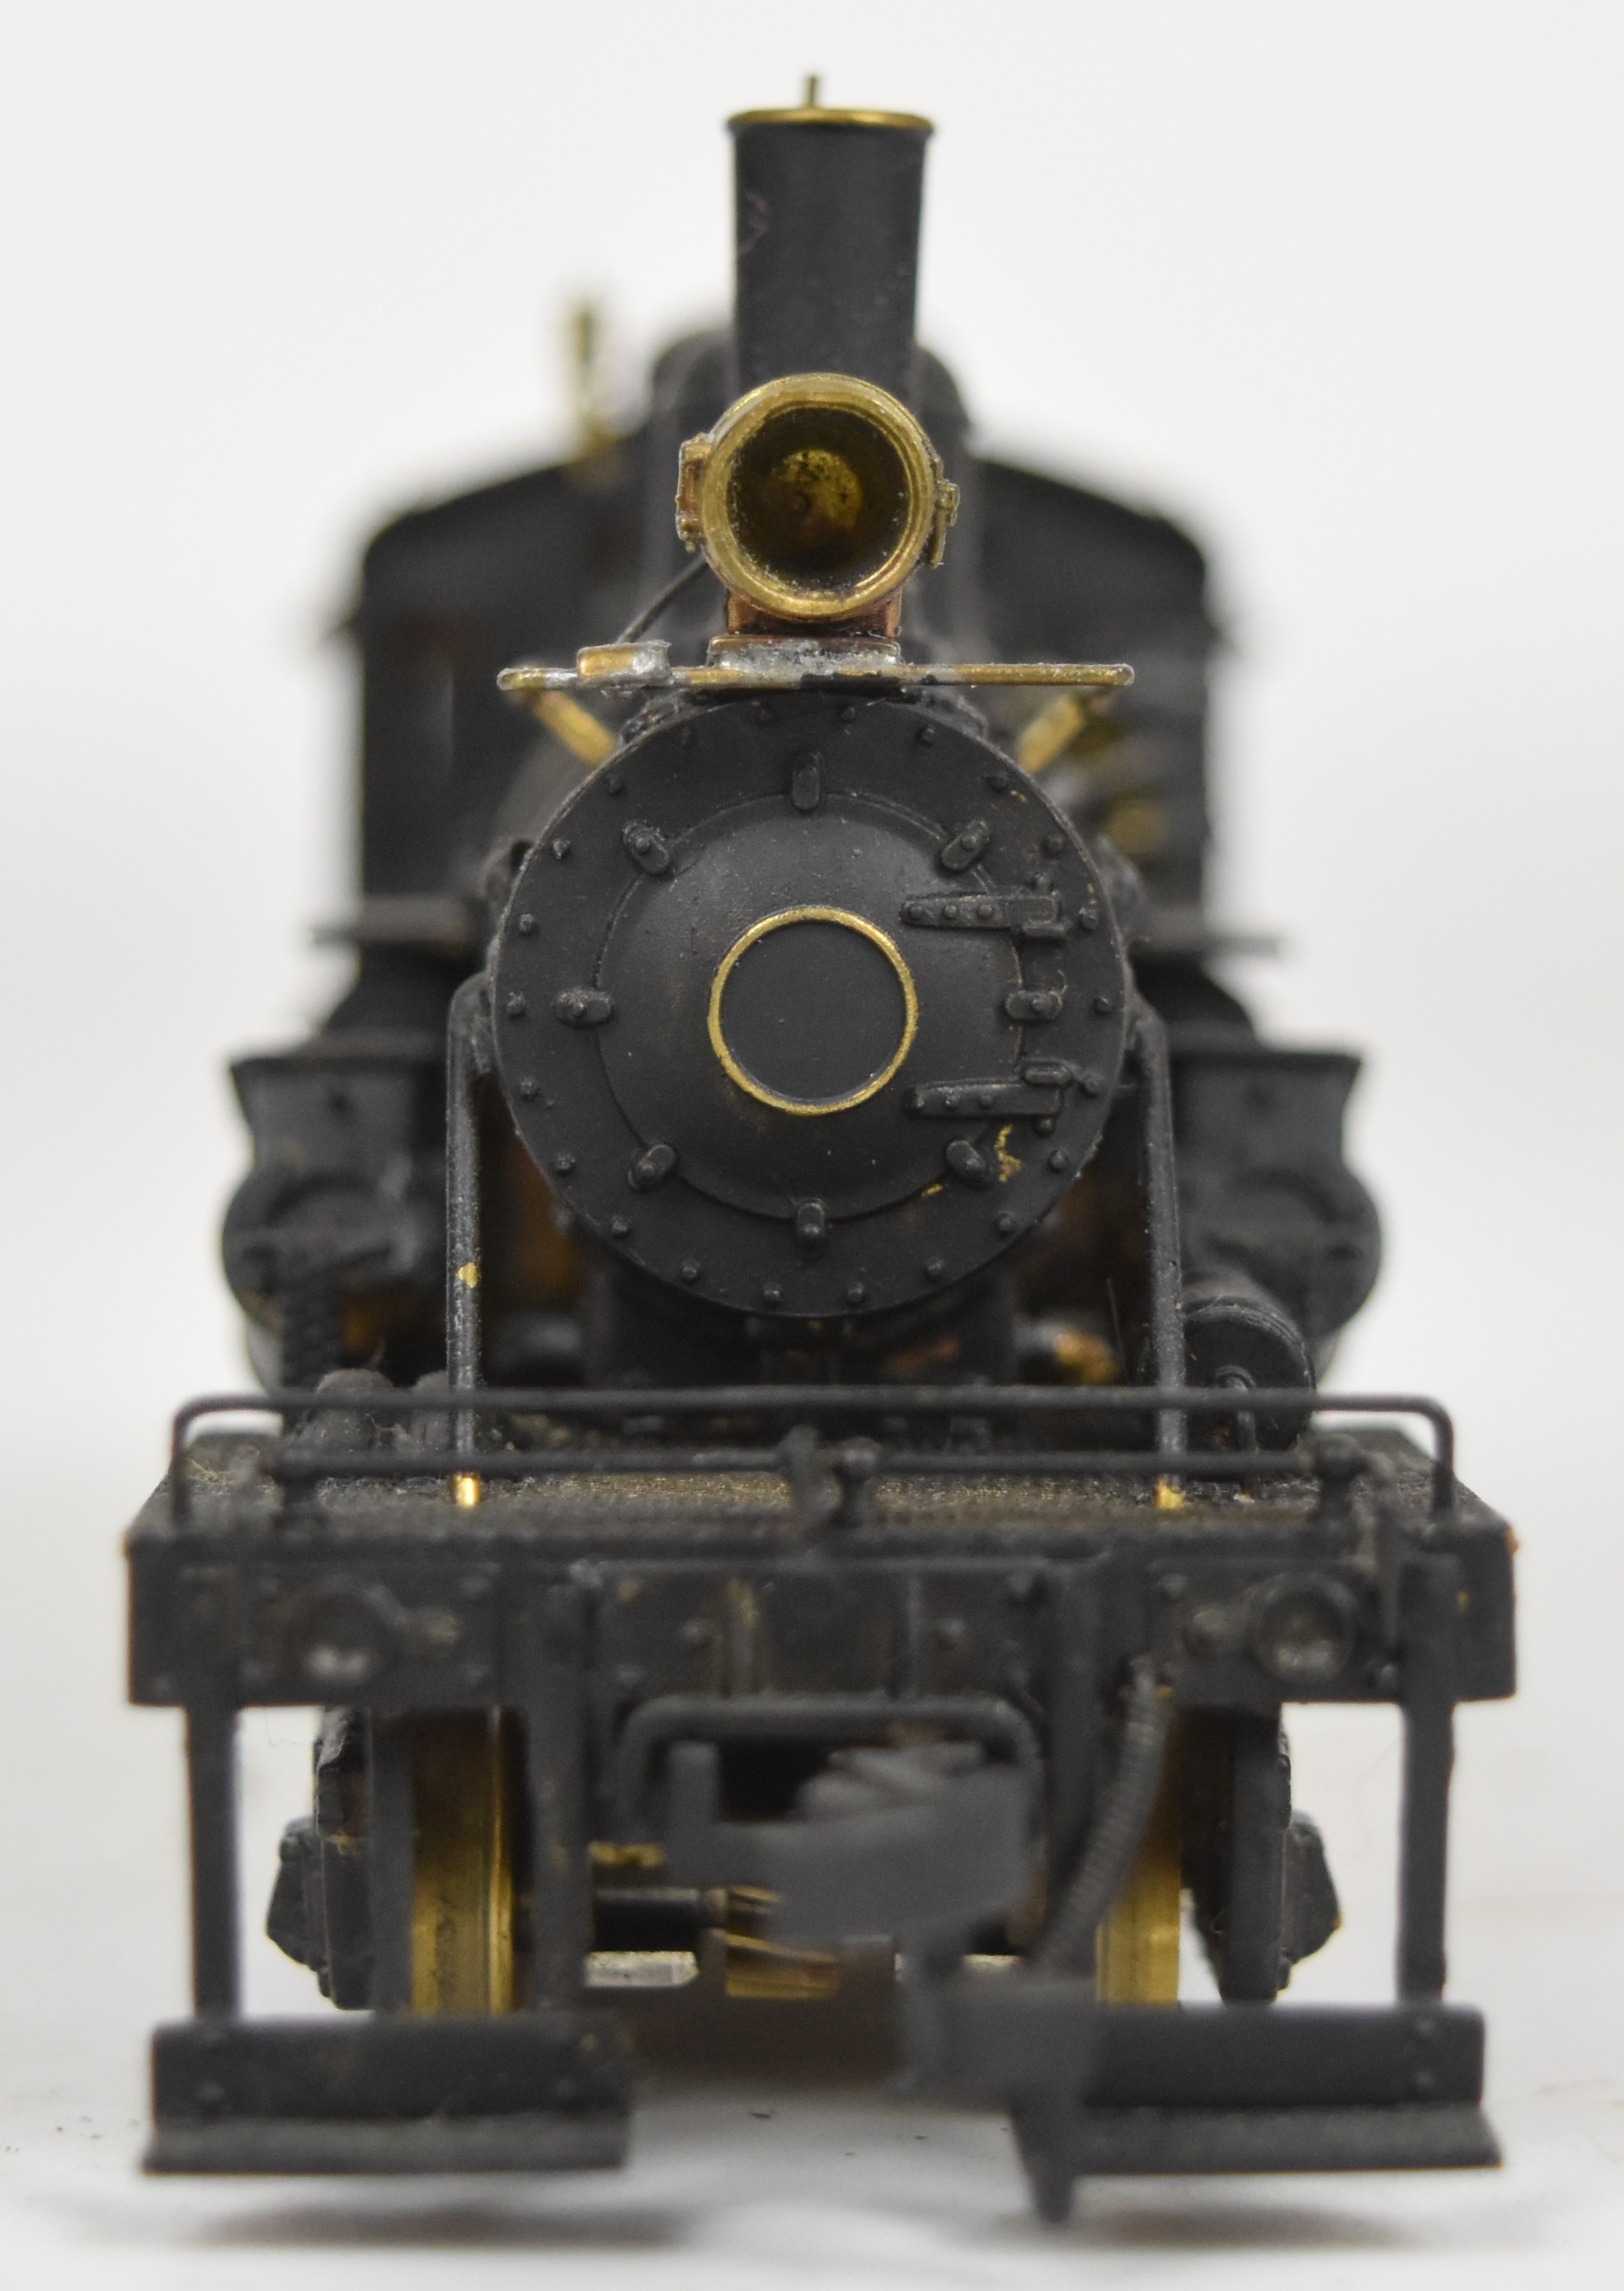 United Scale Models H0 gauge brass 'Climax' geared locomotive, in original box, made in Japan. - Image 5 of 5